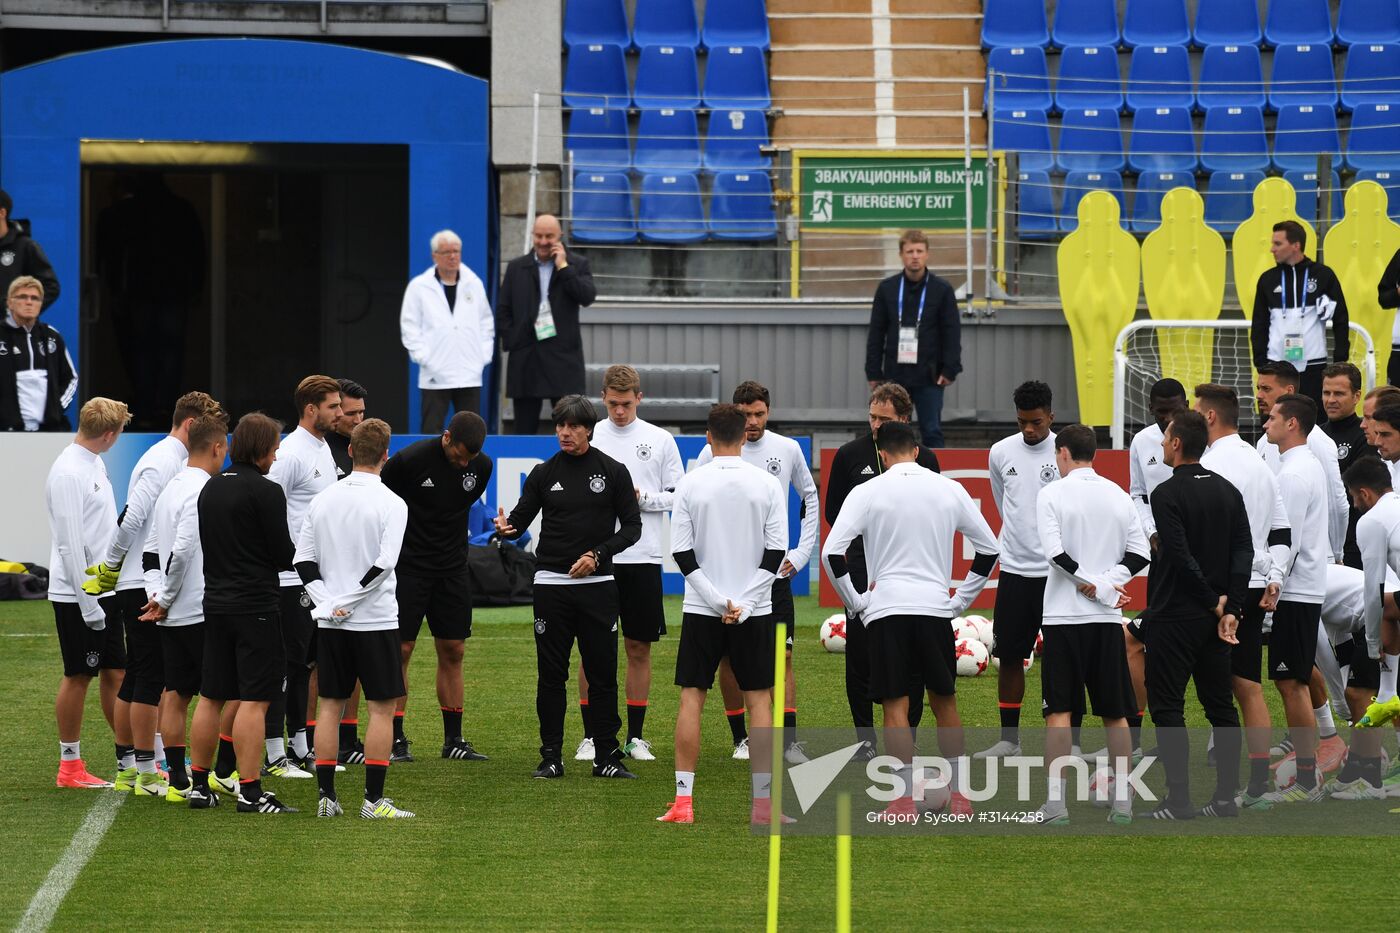 Football. 2017 FIFA Confederations Cup. Training session of Germany’s national team